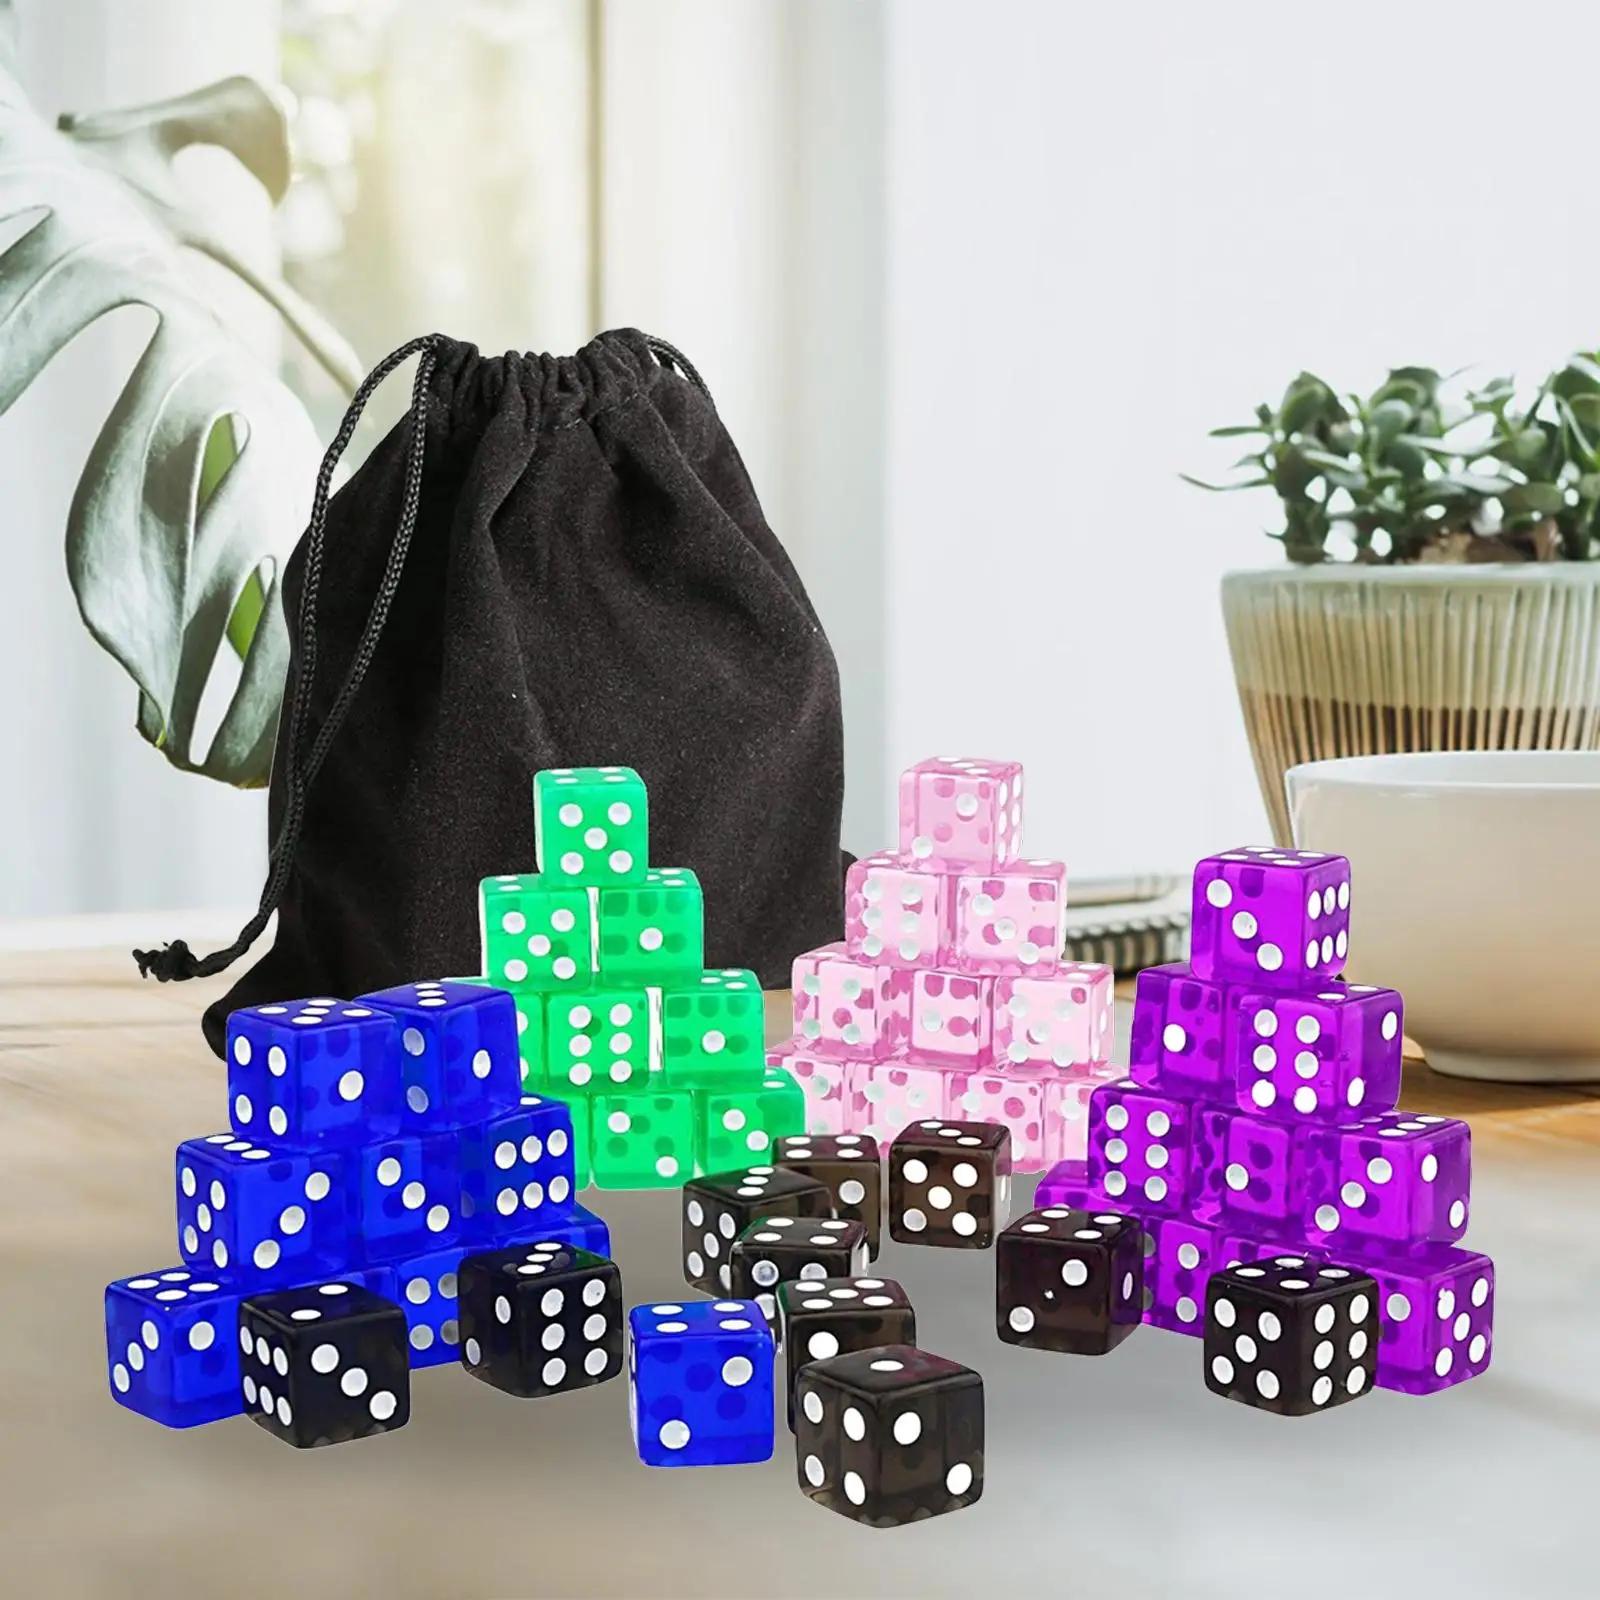 50x 6 Sided Dices Set Entertainment Toy Game Dices for Role Playing Game